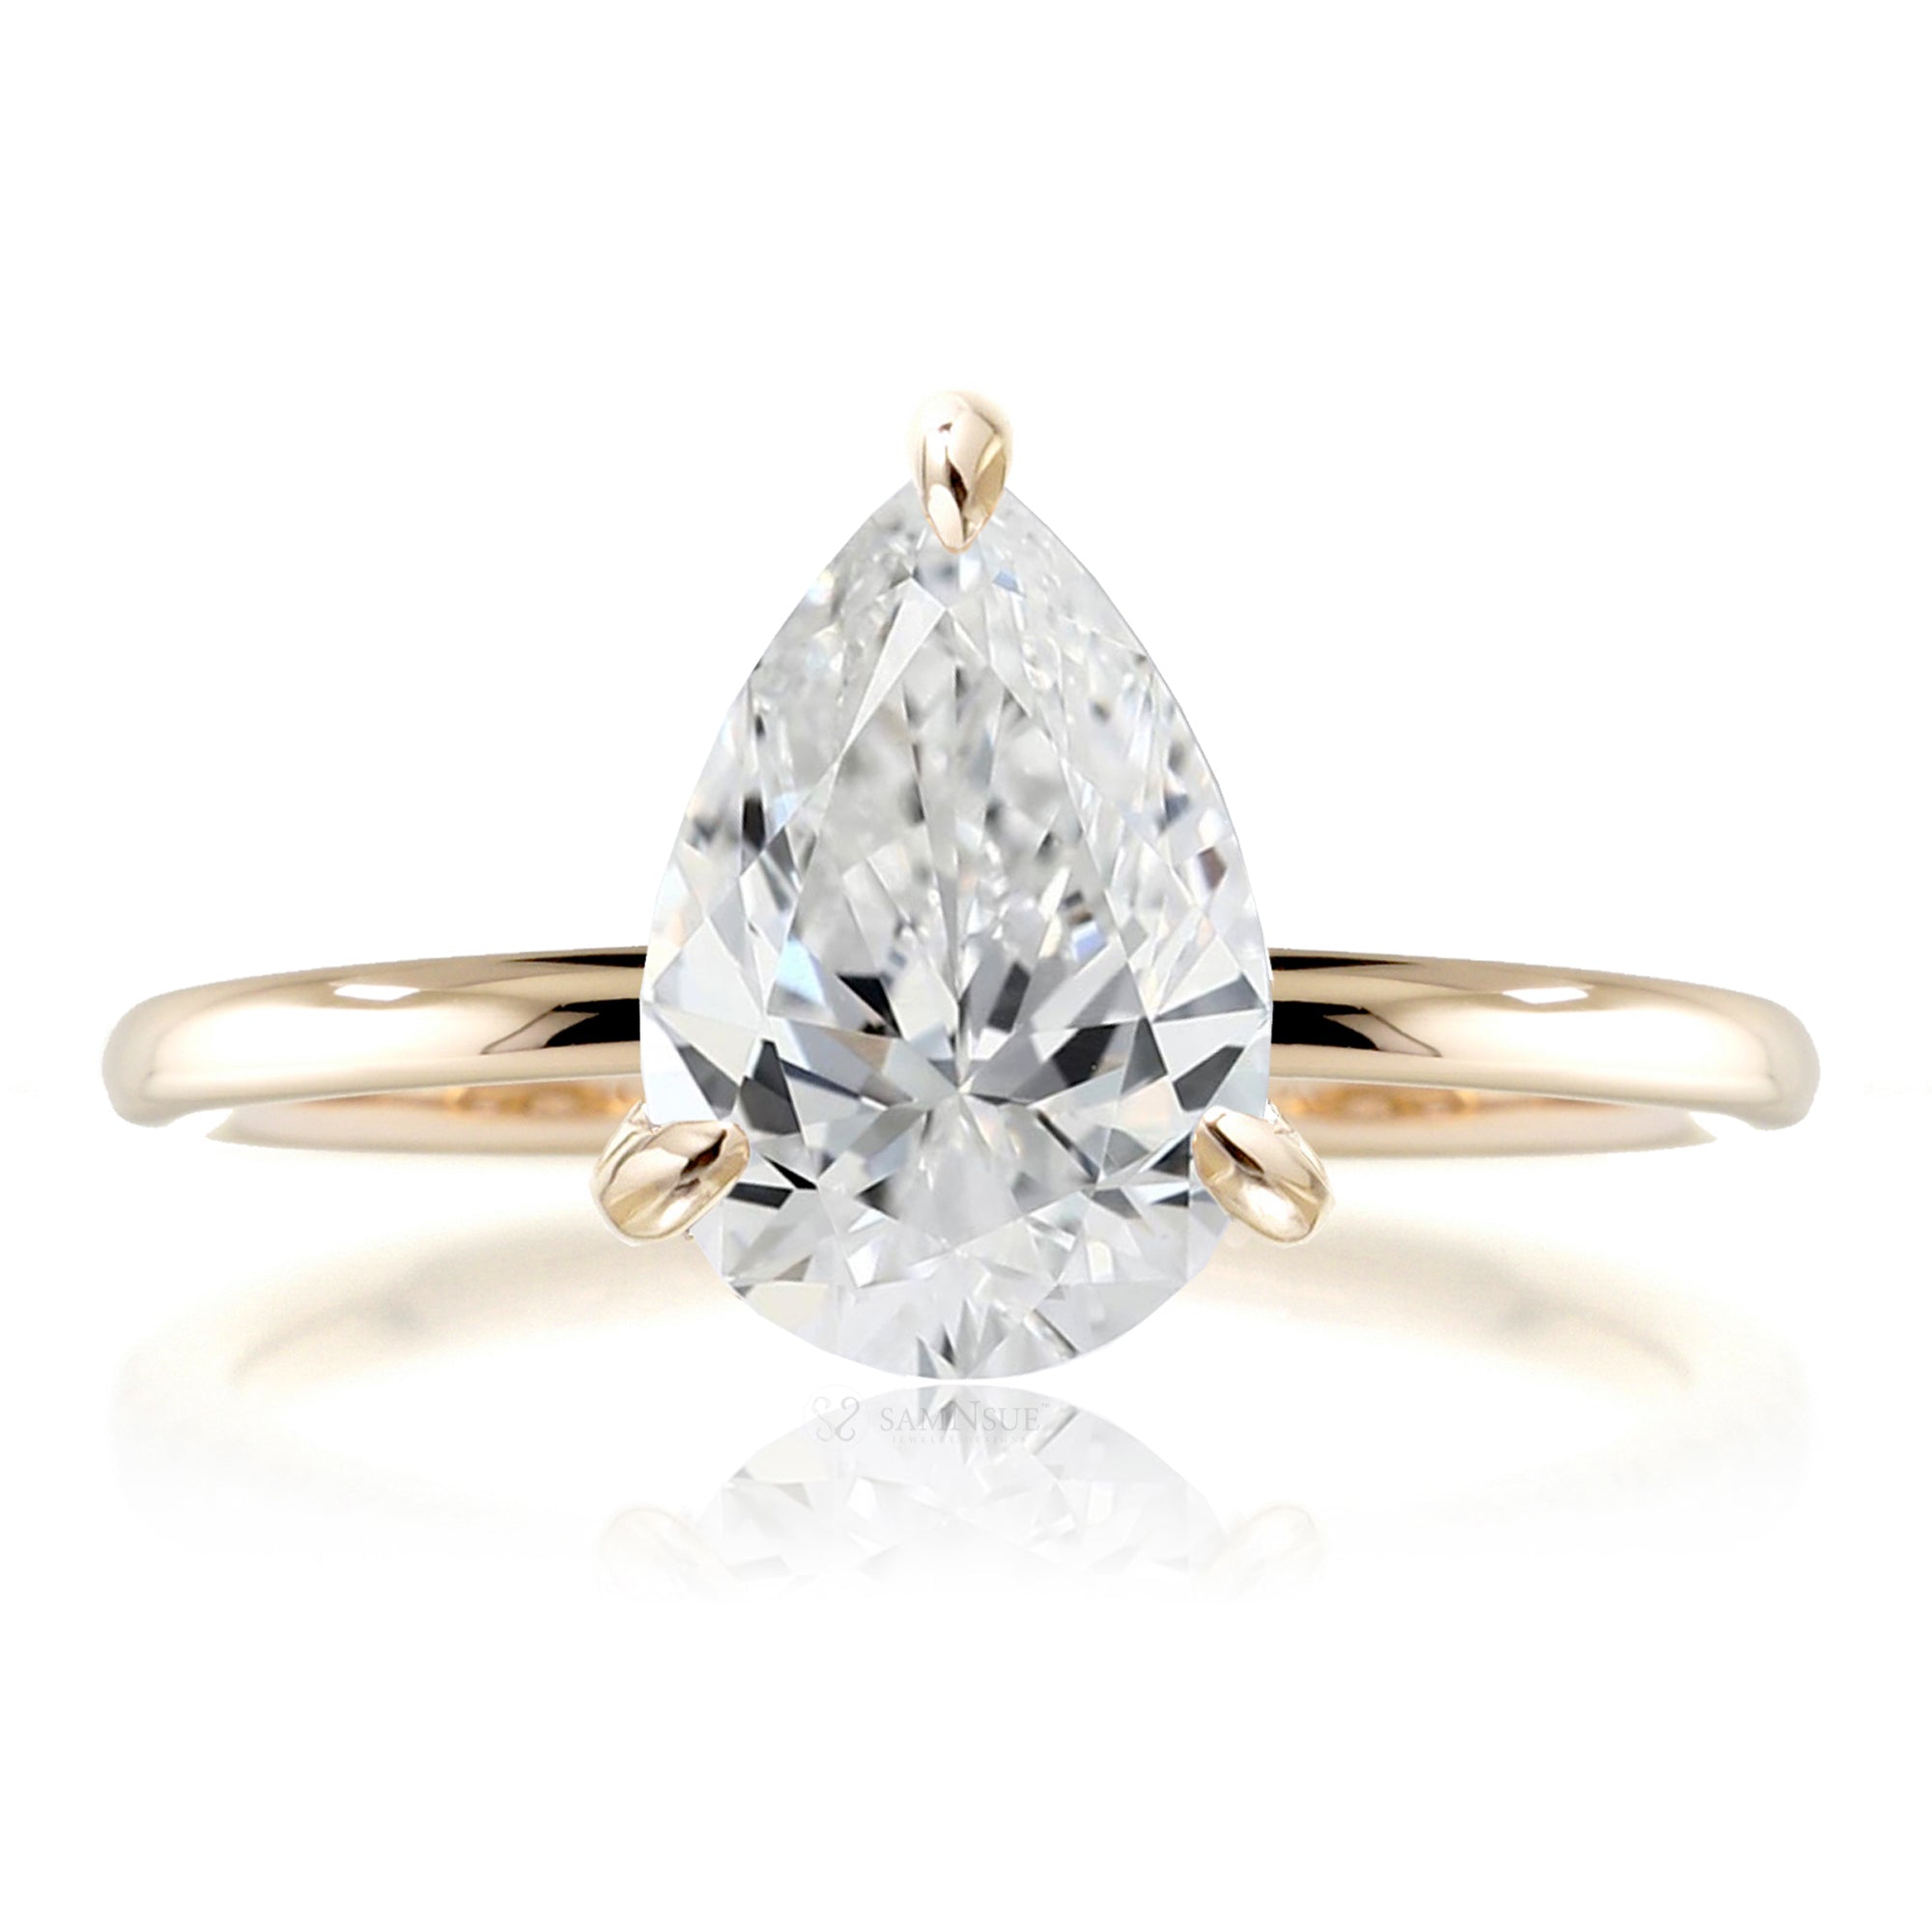 Pear cut lab-grown diamond engagement ring yellow gold - The Ava solid band